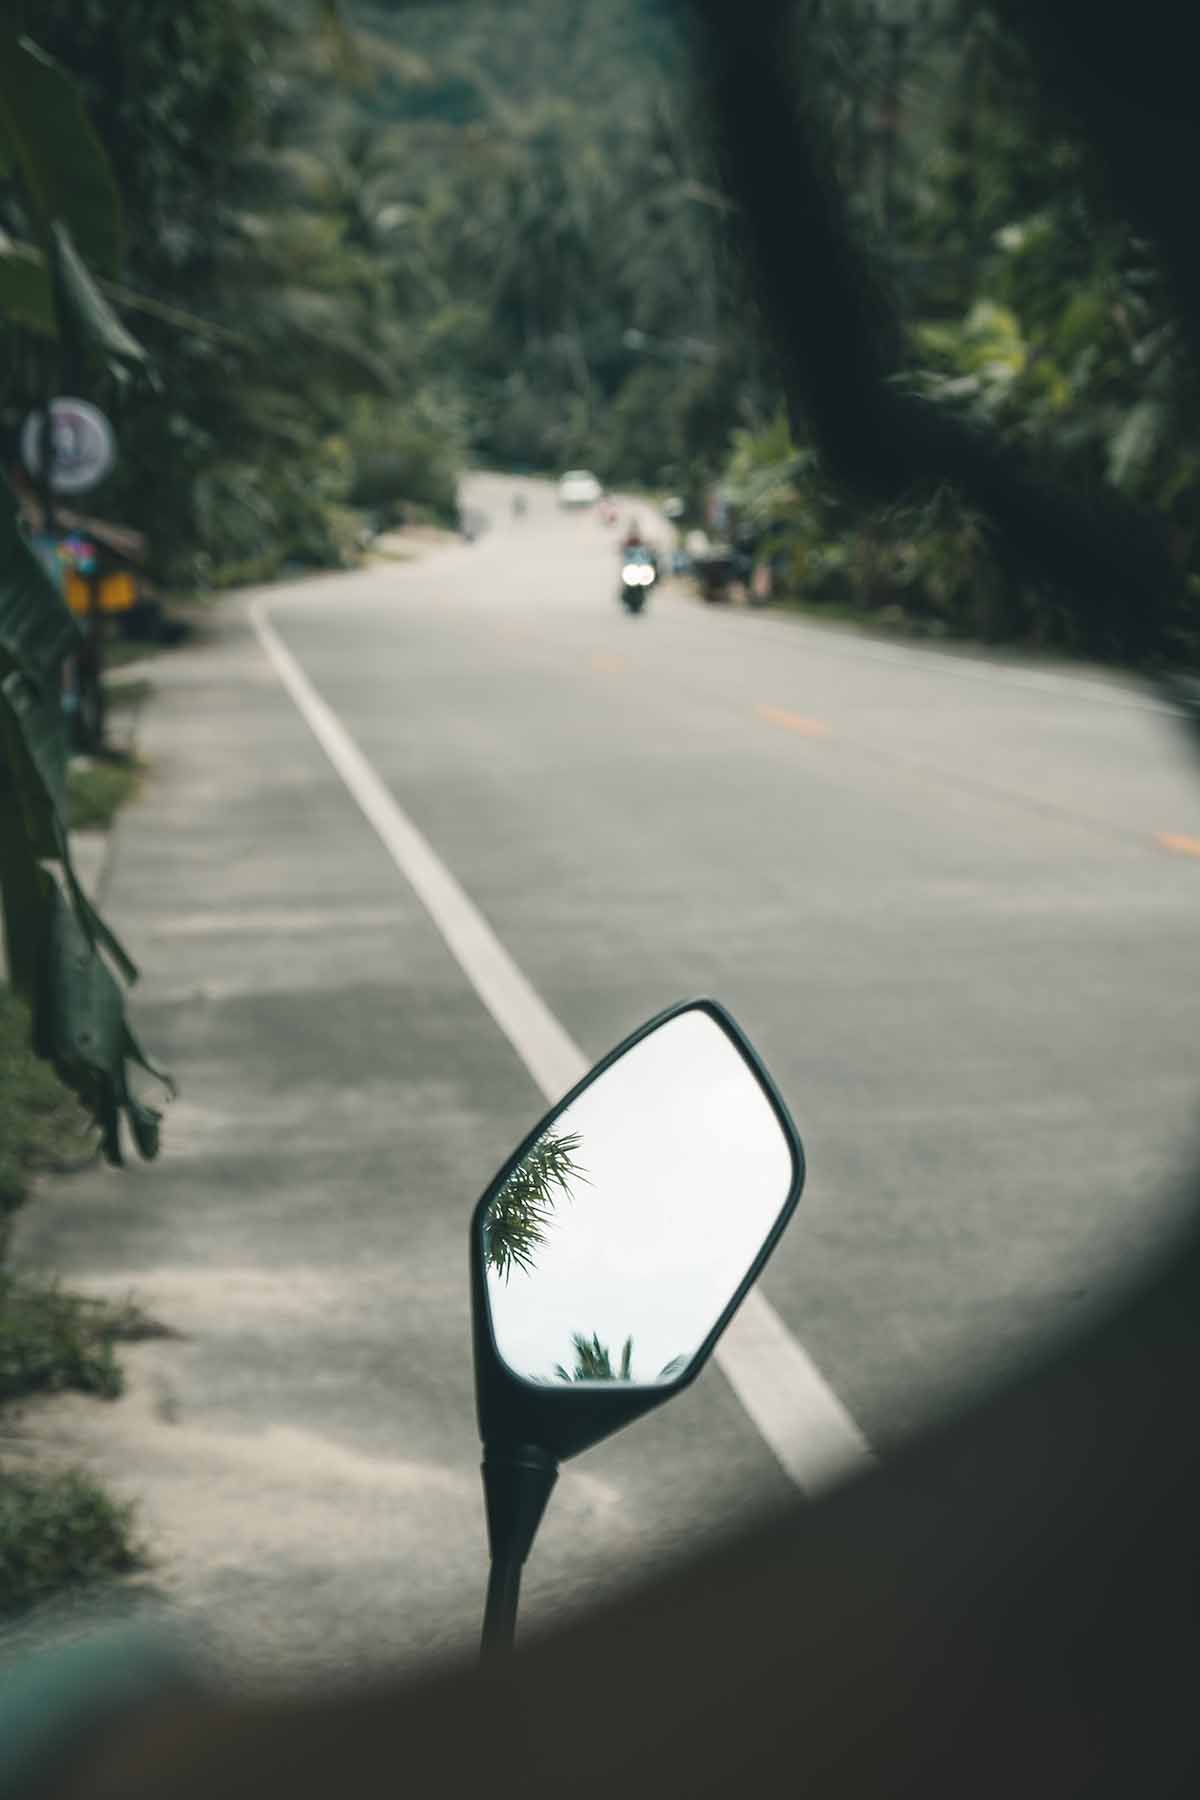 A wing mirror reflecting the edge of two palm trees at the side of a winding road.